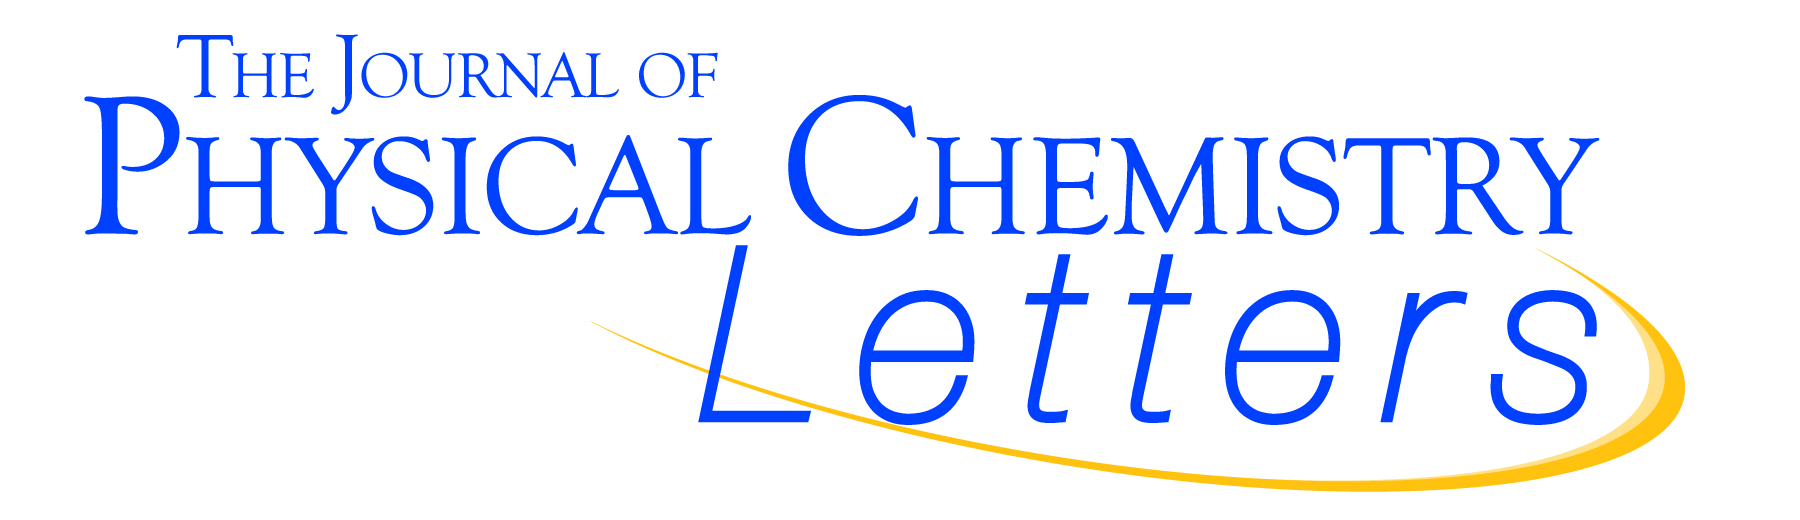 Journal of the chemical society. The Journal of physical Chemistry c. American Chemical Society publications. ACS publications. Journal of the Turkish Chemical Society.